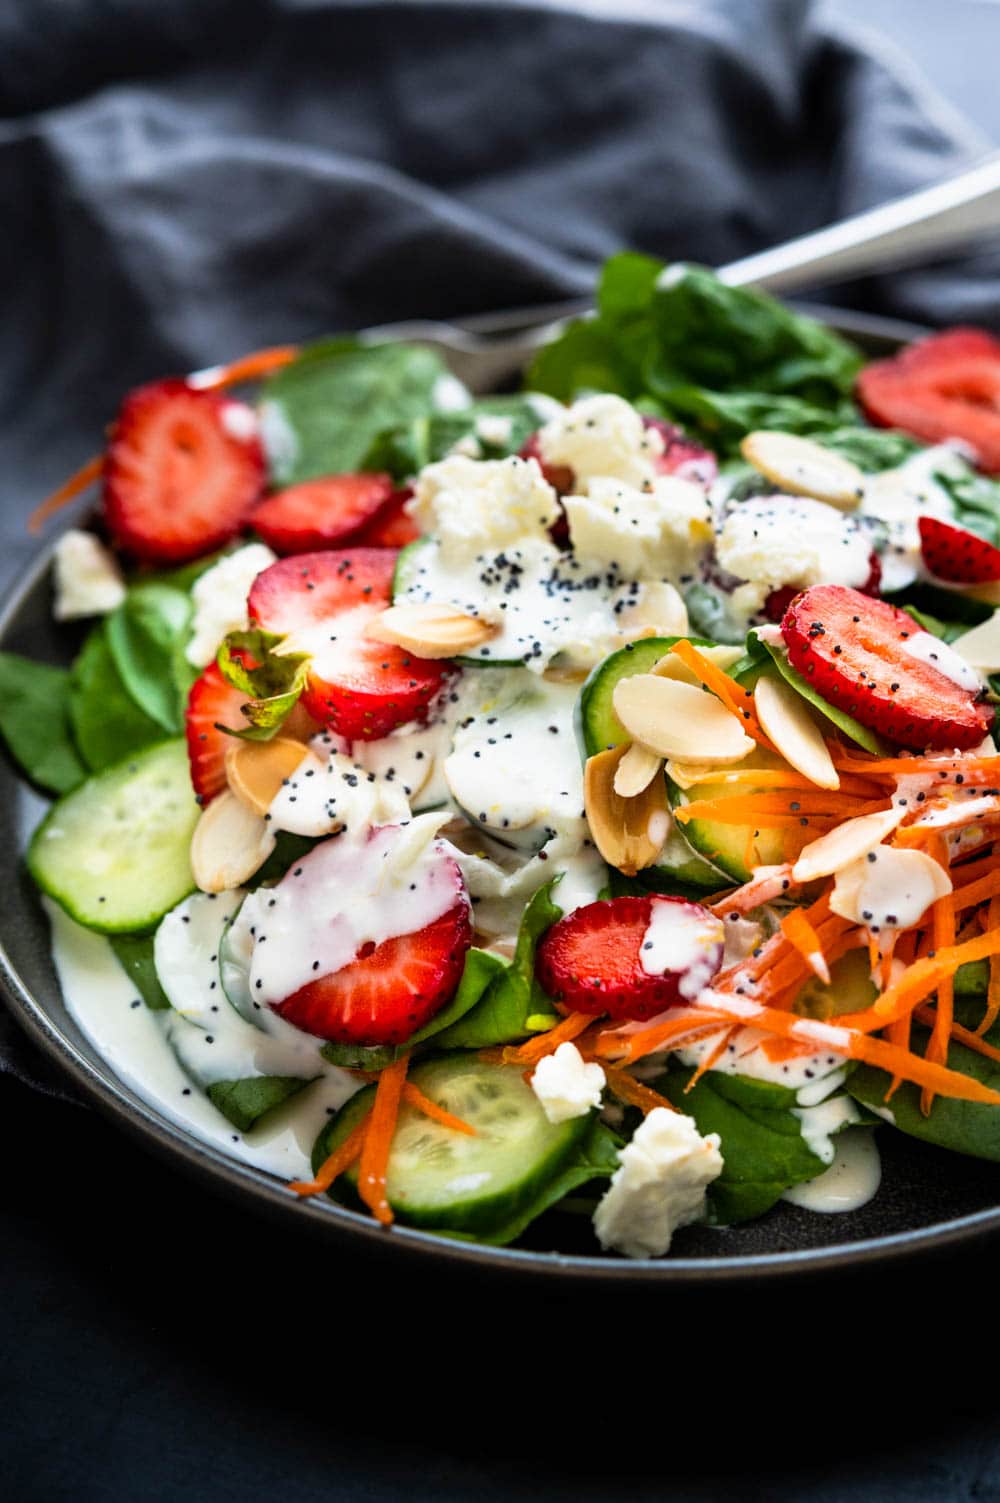 A dressed plate of strawberry and spinach salad with carrots, almonds and crumbled cheese.